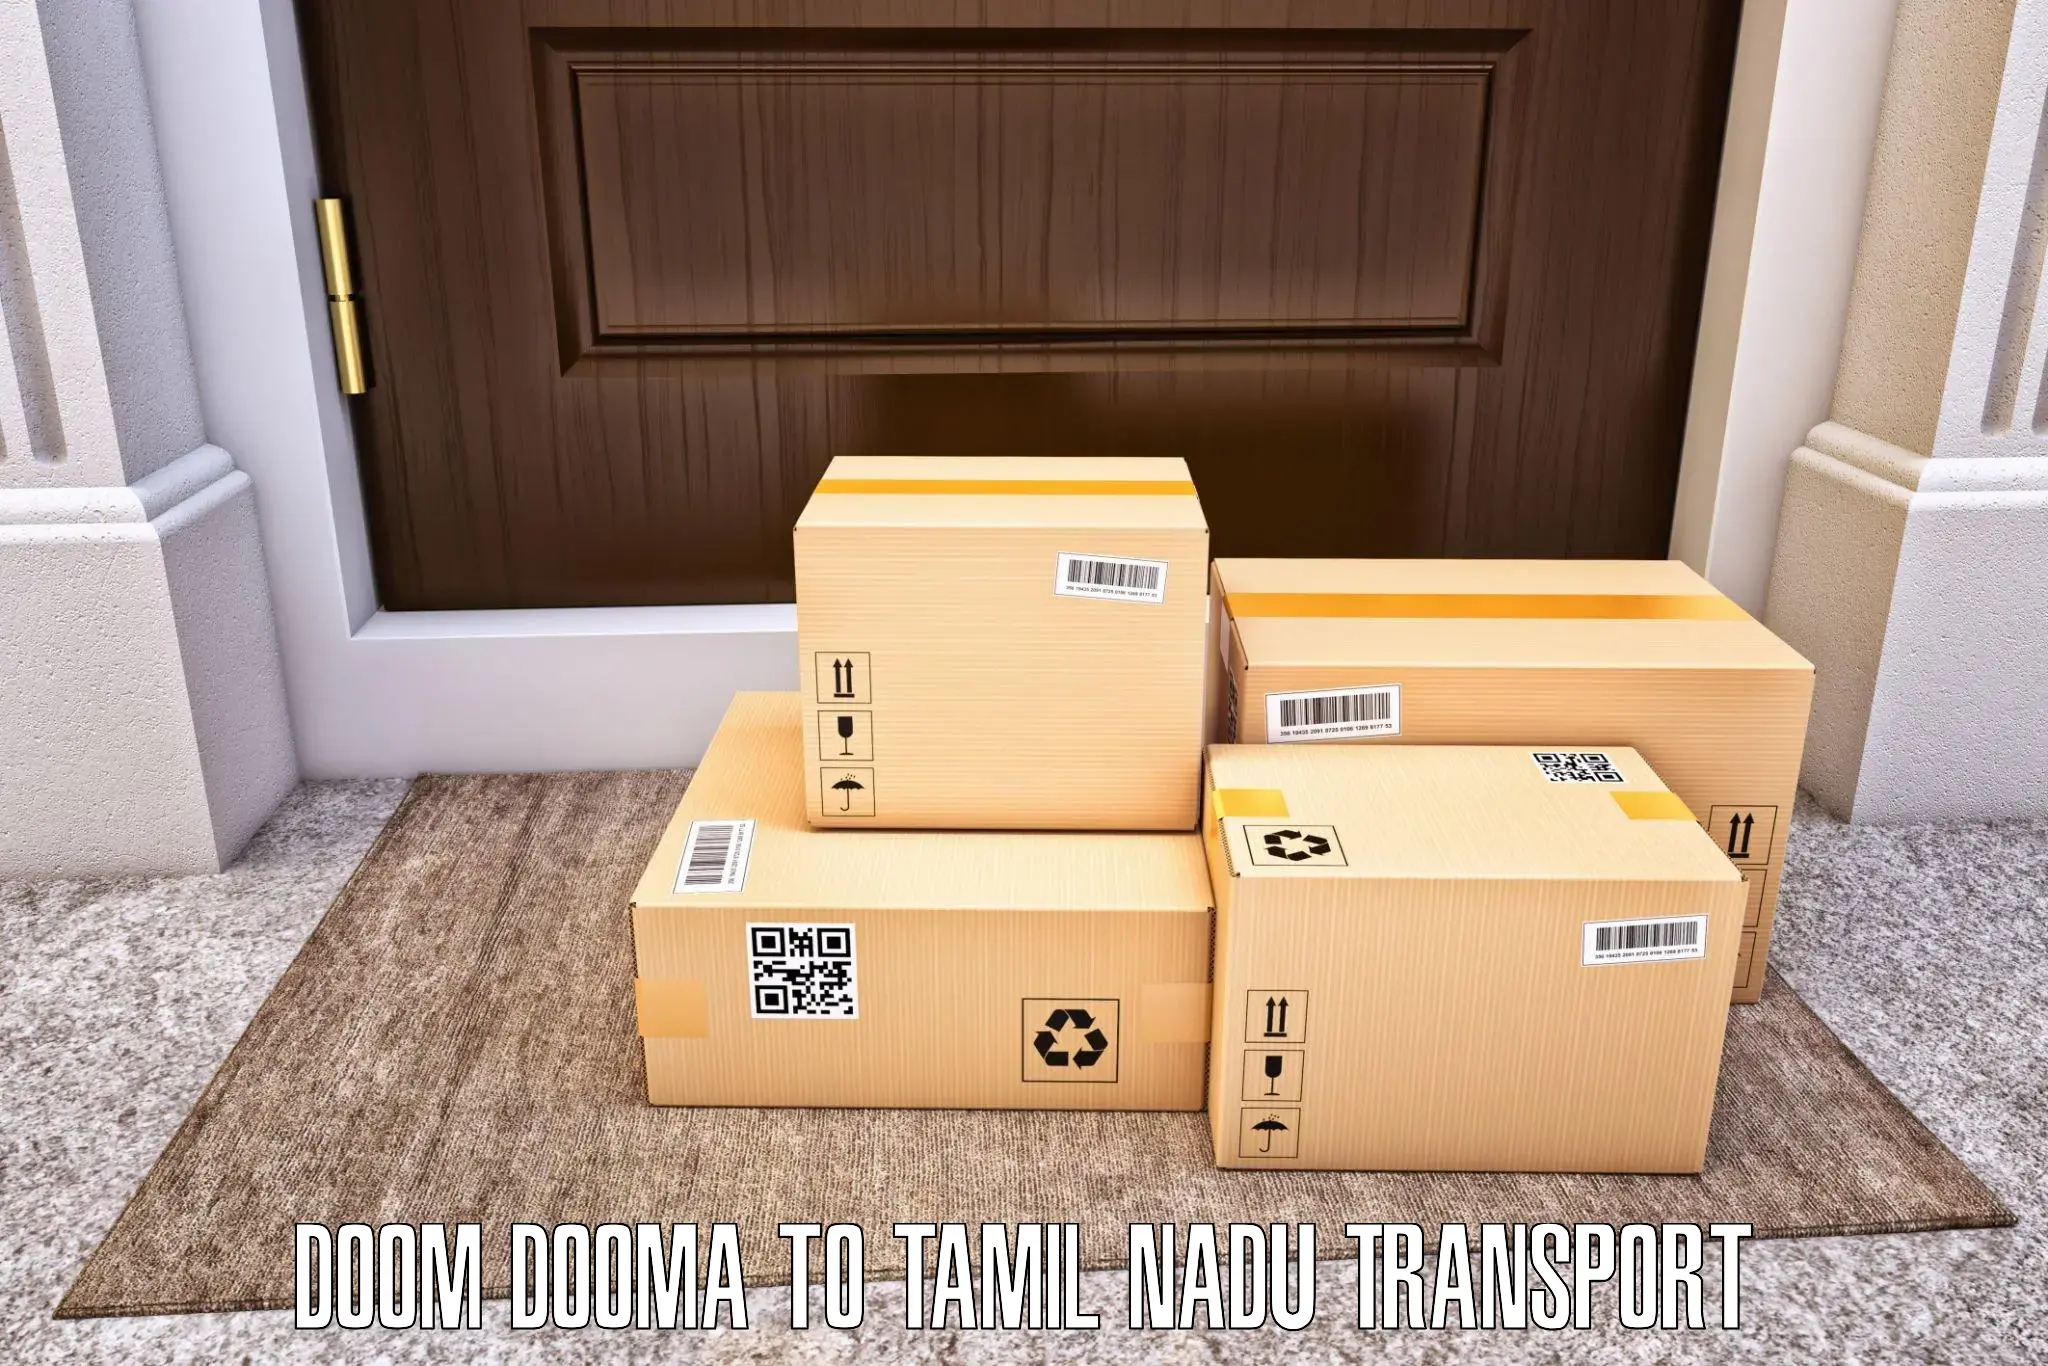 Scooty transport charges Doom Dooma to Salem